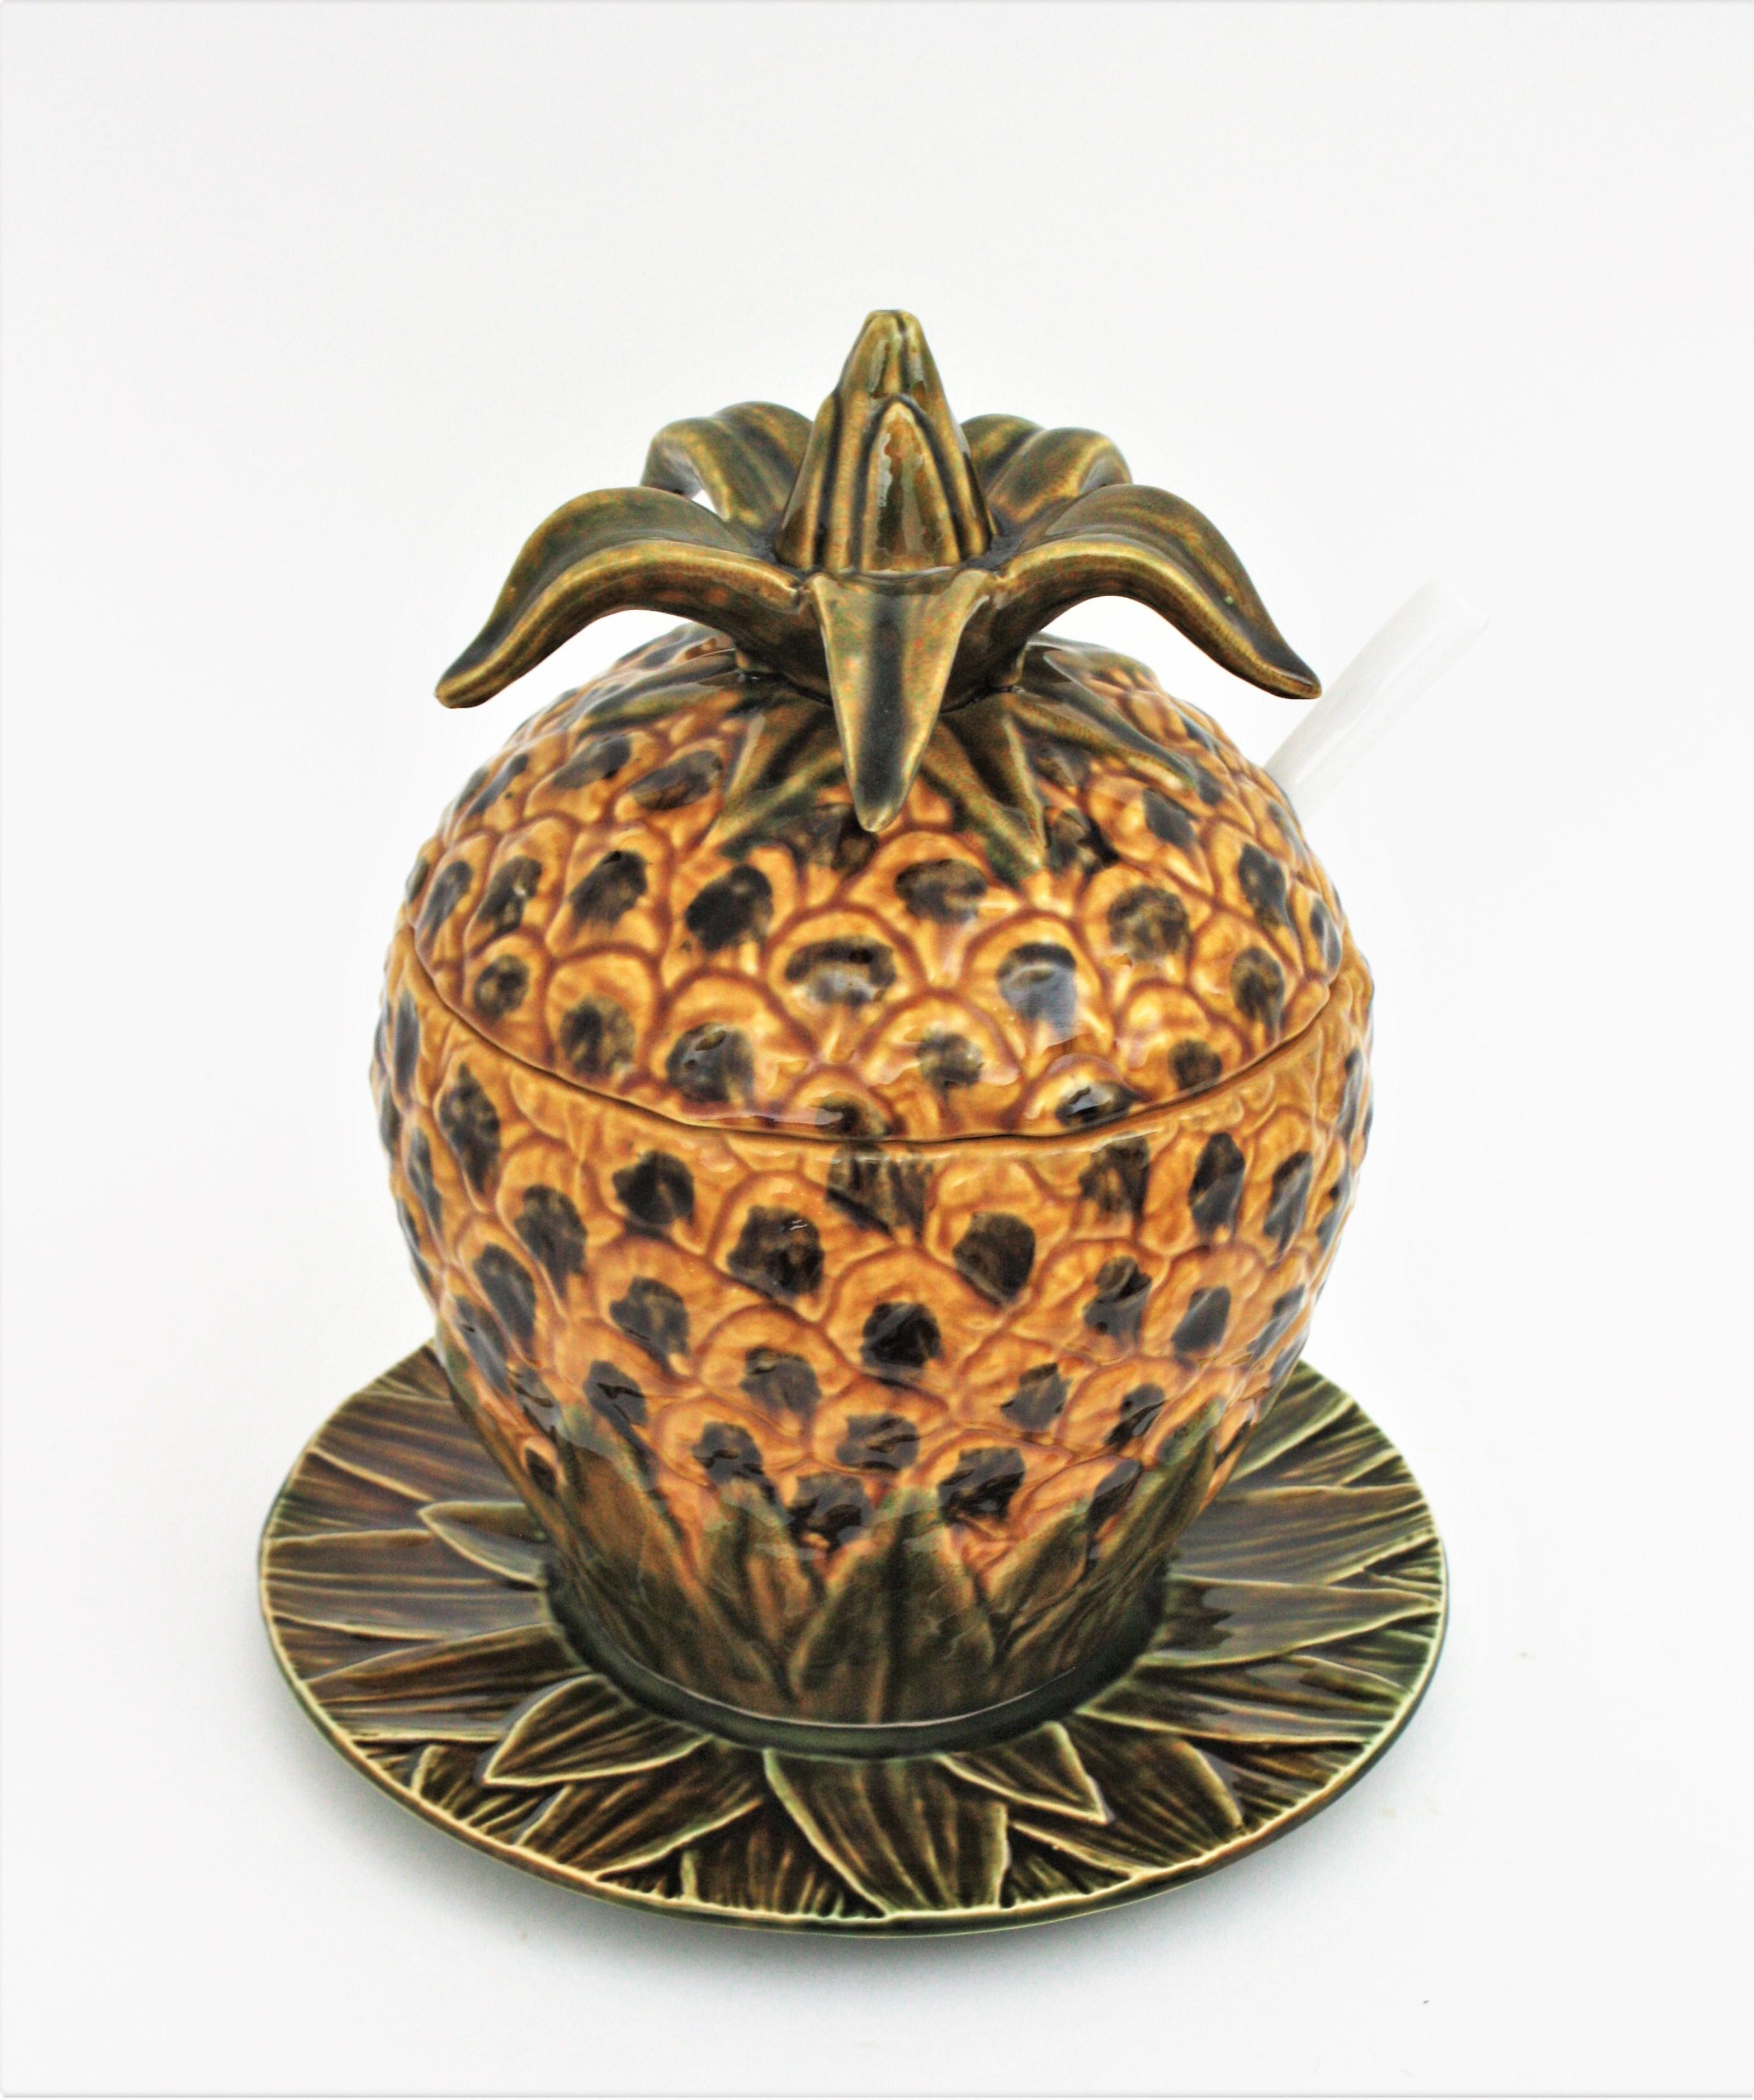 Portuguese Midcentury Pineapple XL Tureen Centerpiece in Glazed Ceramic, 1960s For Sale